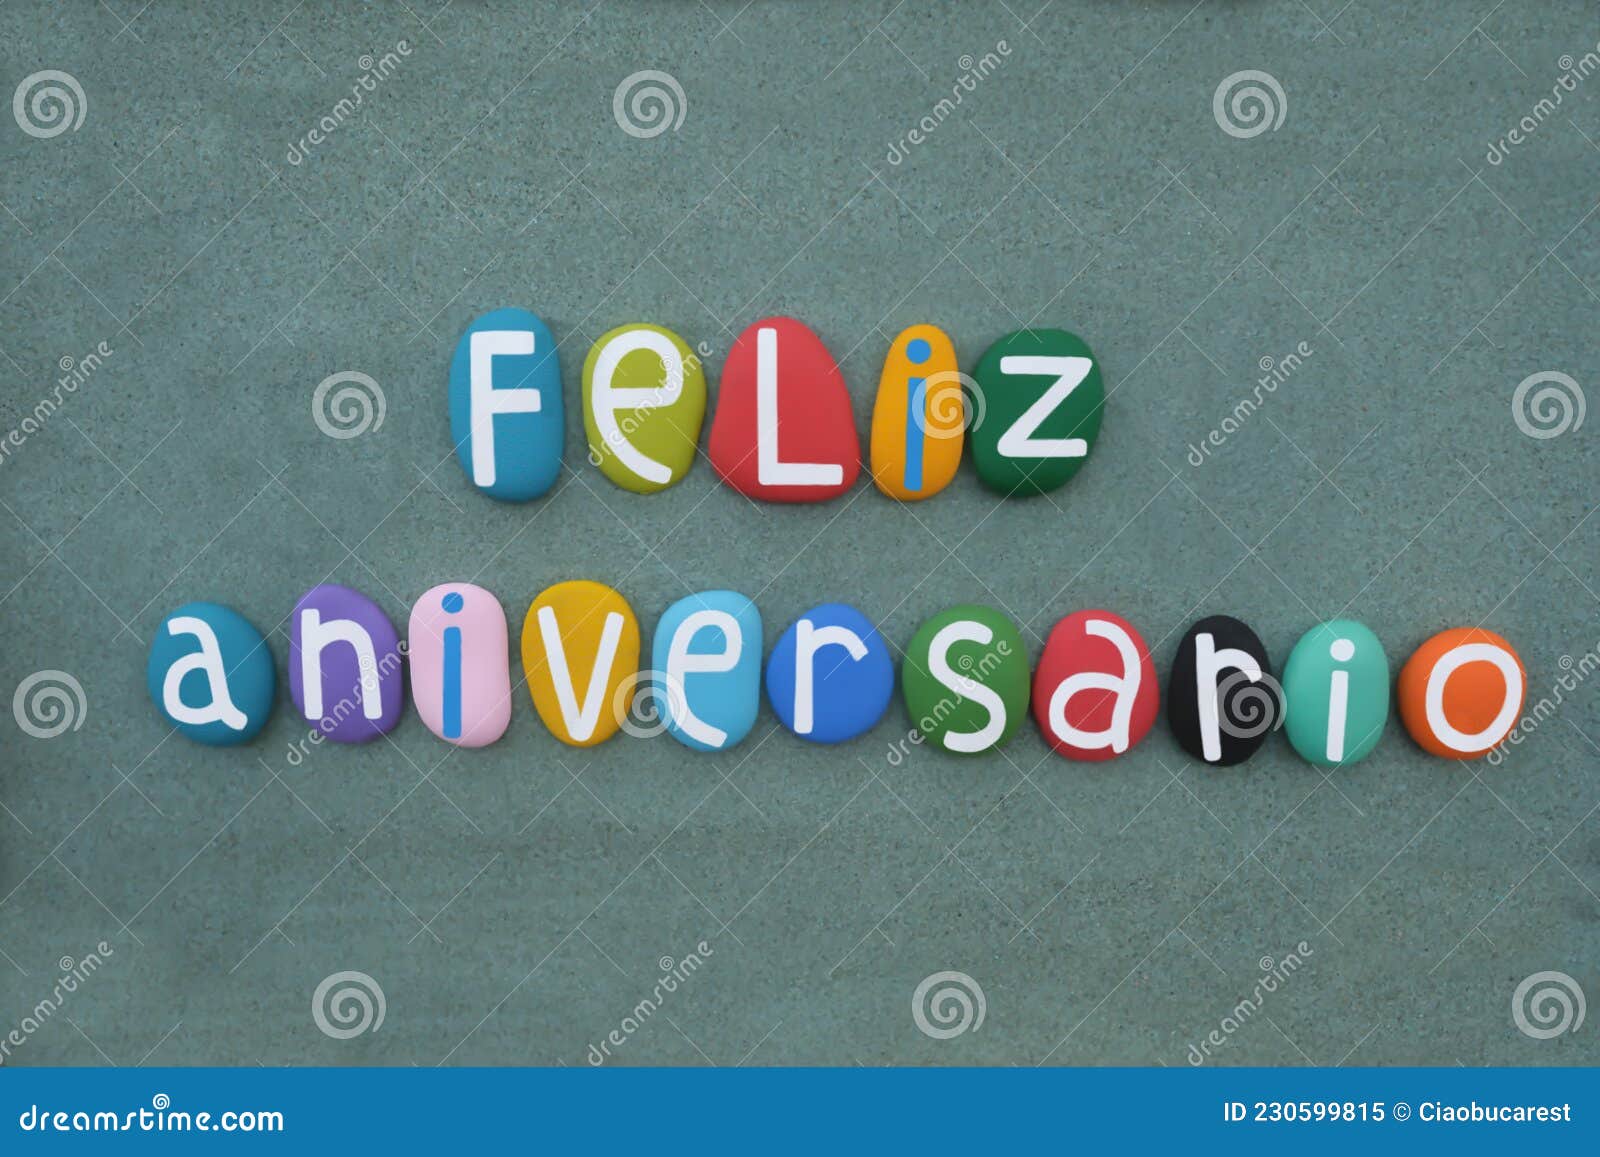 feliz aniversario, spanish and portuguese happy birthday text composed with colored stone letters